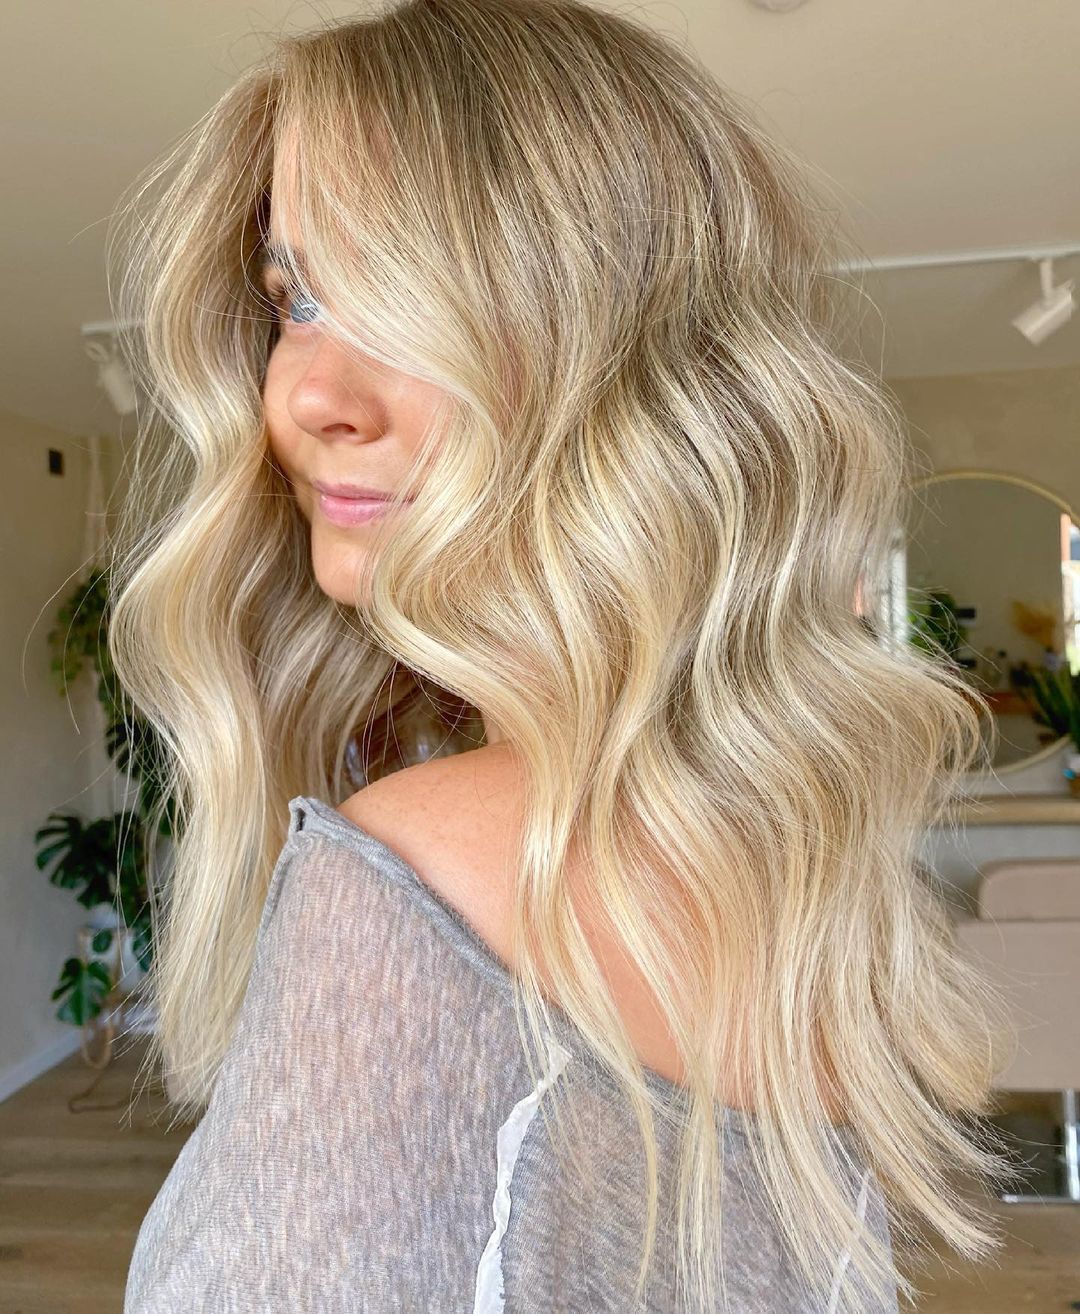 50 Awesome Long Layered Hair Ideas For 2021 images 3